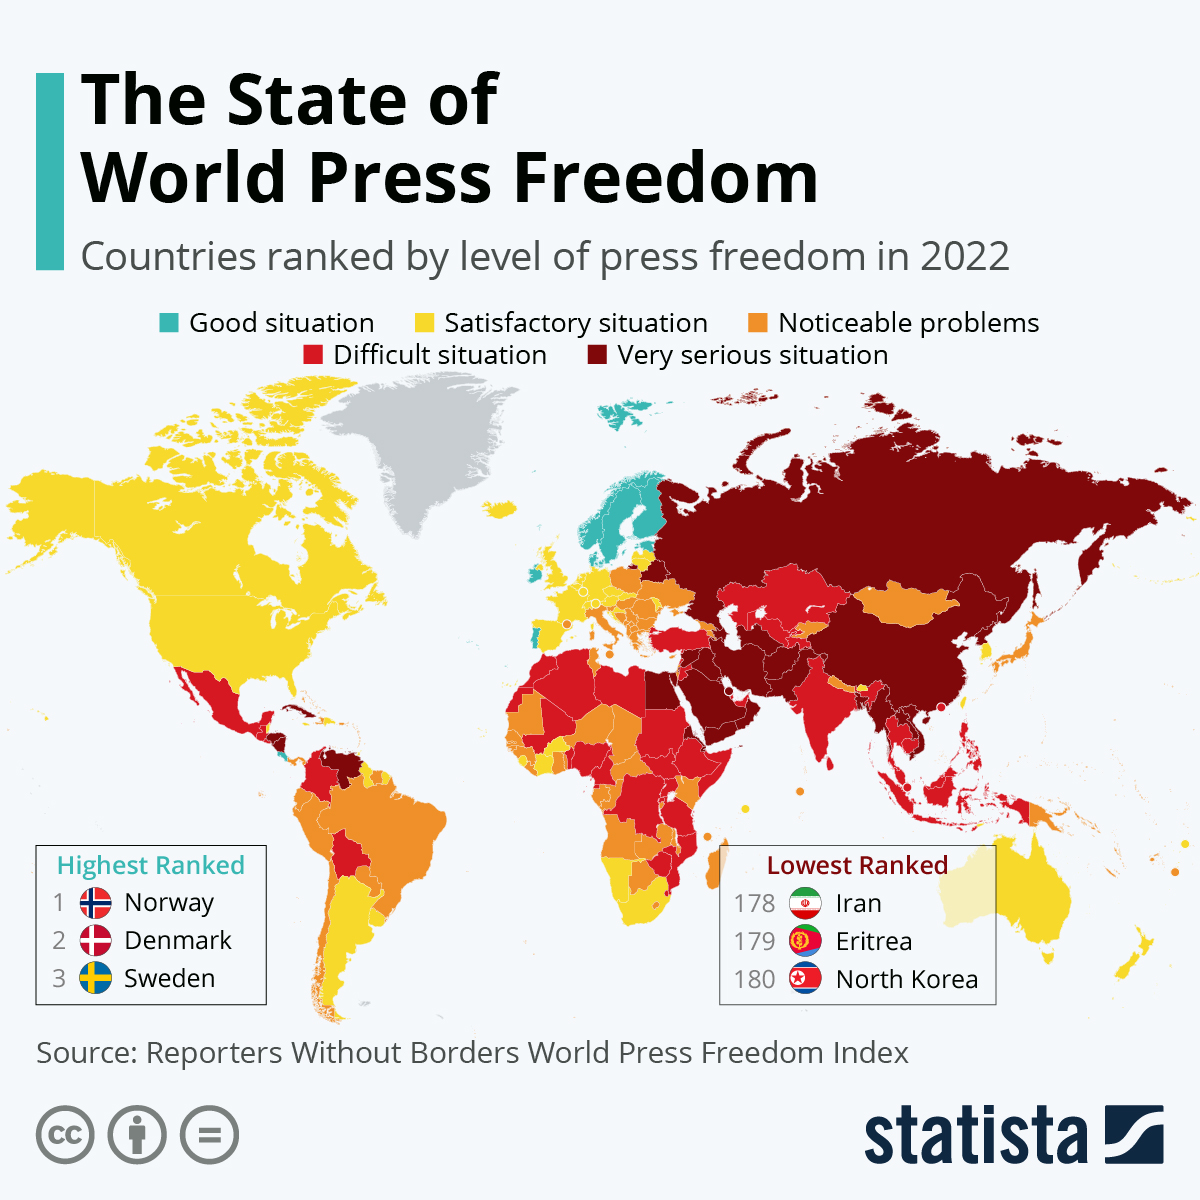 A coloured map showing differing levels of press freedom in countries across the world.